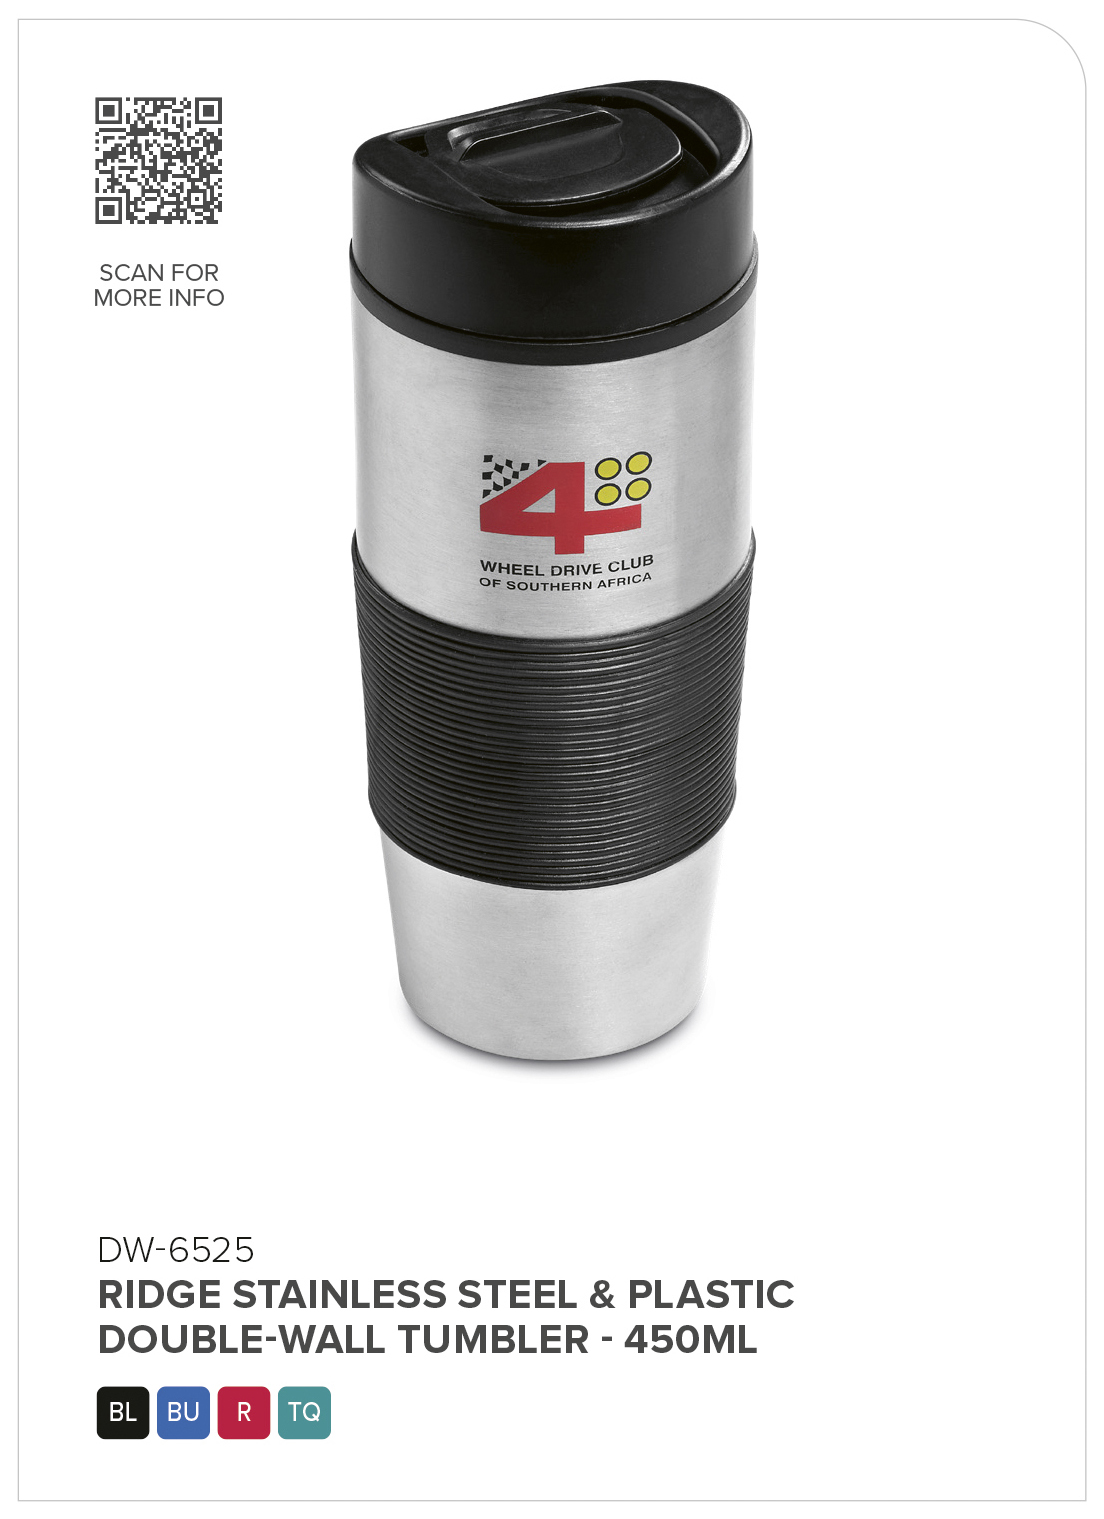 Ridge Stainless Steel & Plastic Double-Wall Tumbler - 450ml CATALOGUE_IMAGE